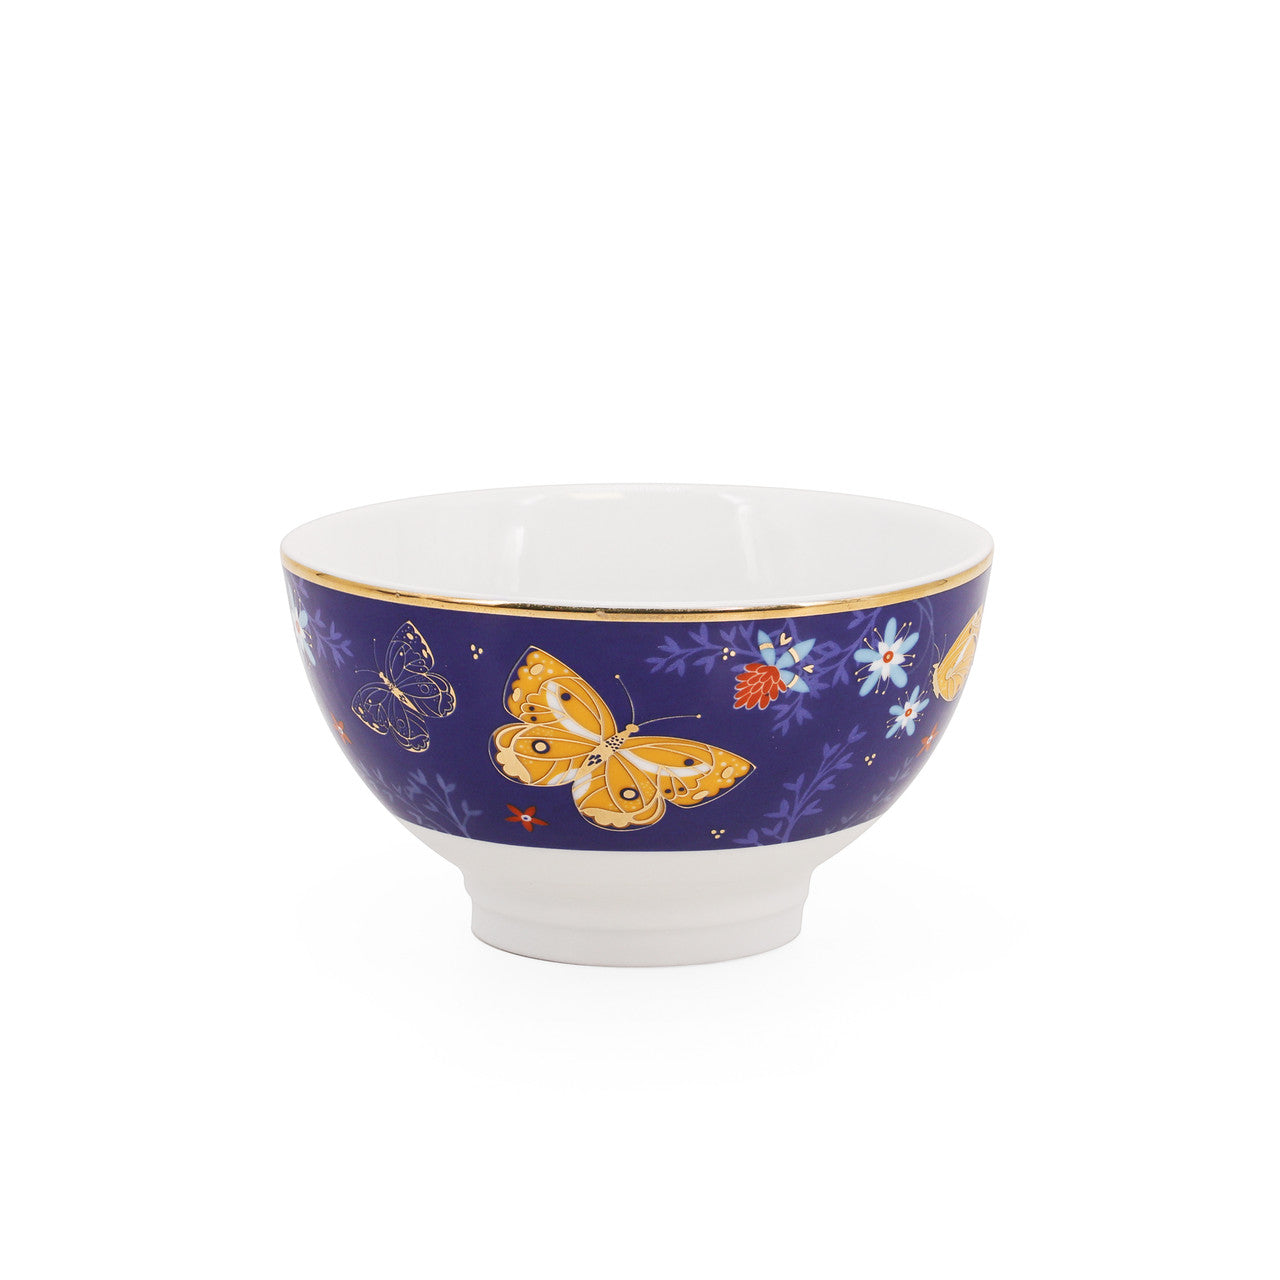 Tipperary Crystal Butterfly S/4 Cereal Bowls  Drawing inspiration from urban garden, the Tipperary Crystal Butterfly collection transforms an icon into something modern and unexpected. Playful and elegant, this collection draws from the inherent beauty of the butterfly.